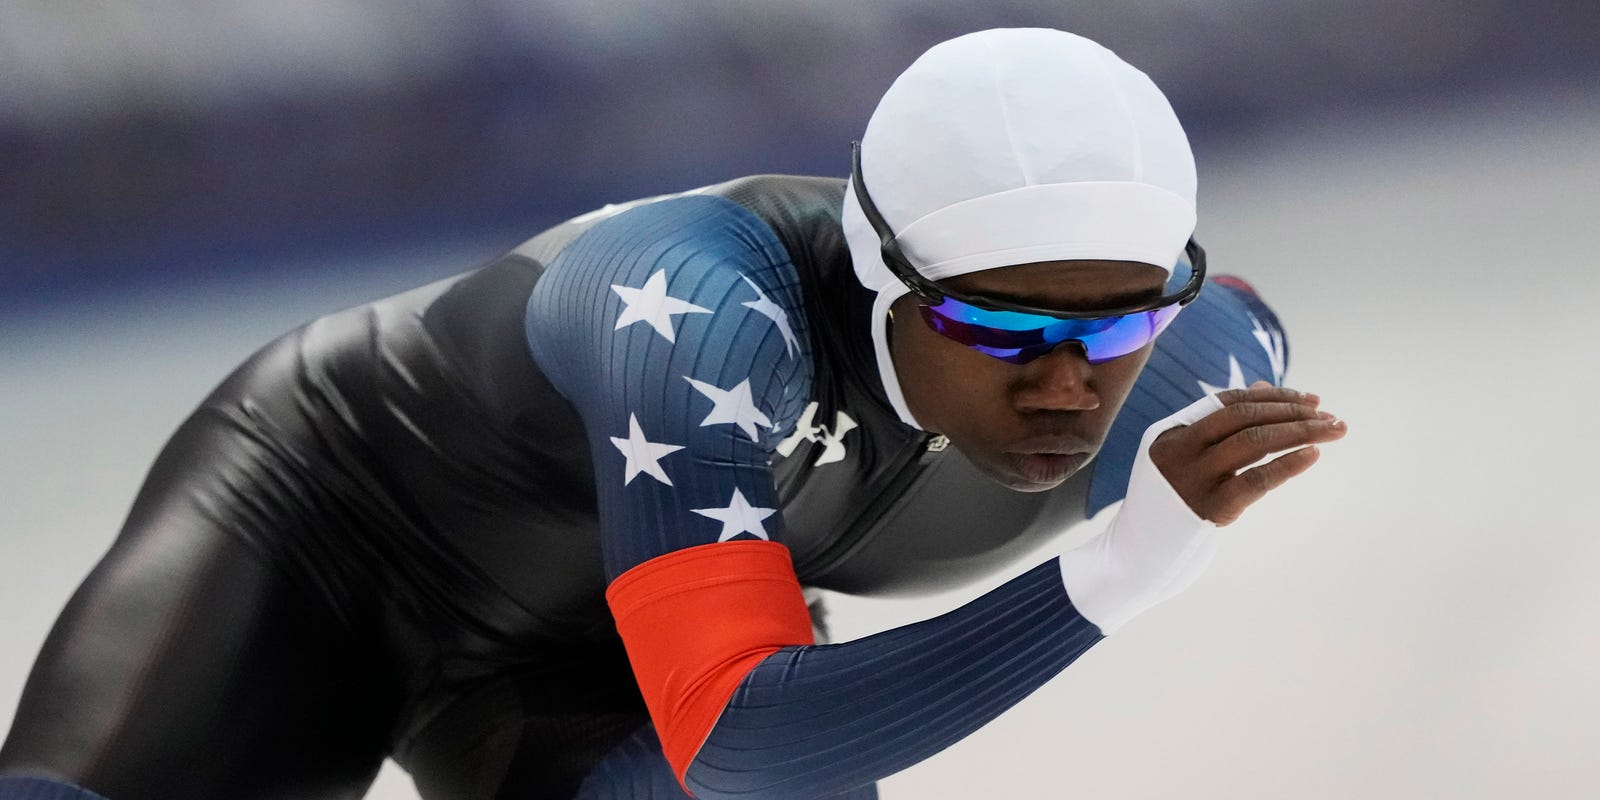 Erin Jackson claims gold in women’s 500 meters at 2022 Winter Olympics